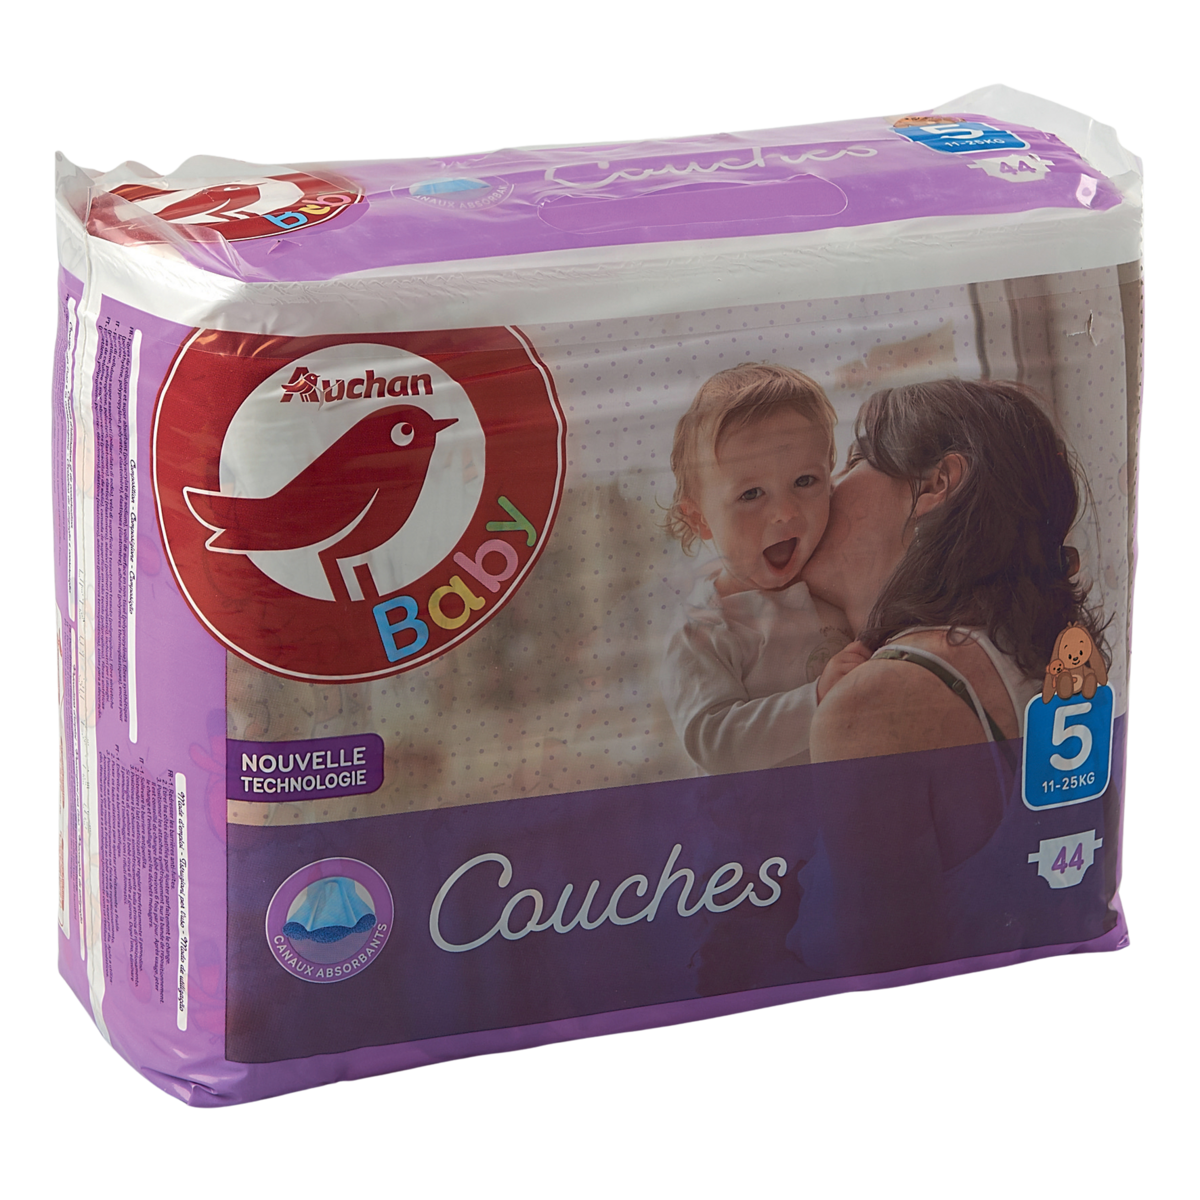 AUCHAN BABY Couches taille 5 (11-25kg) 44 couches